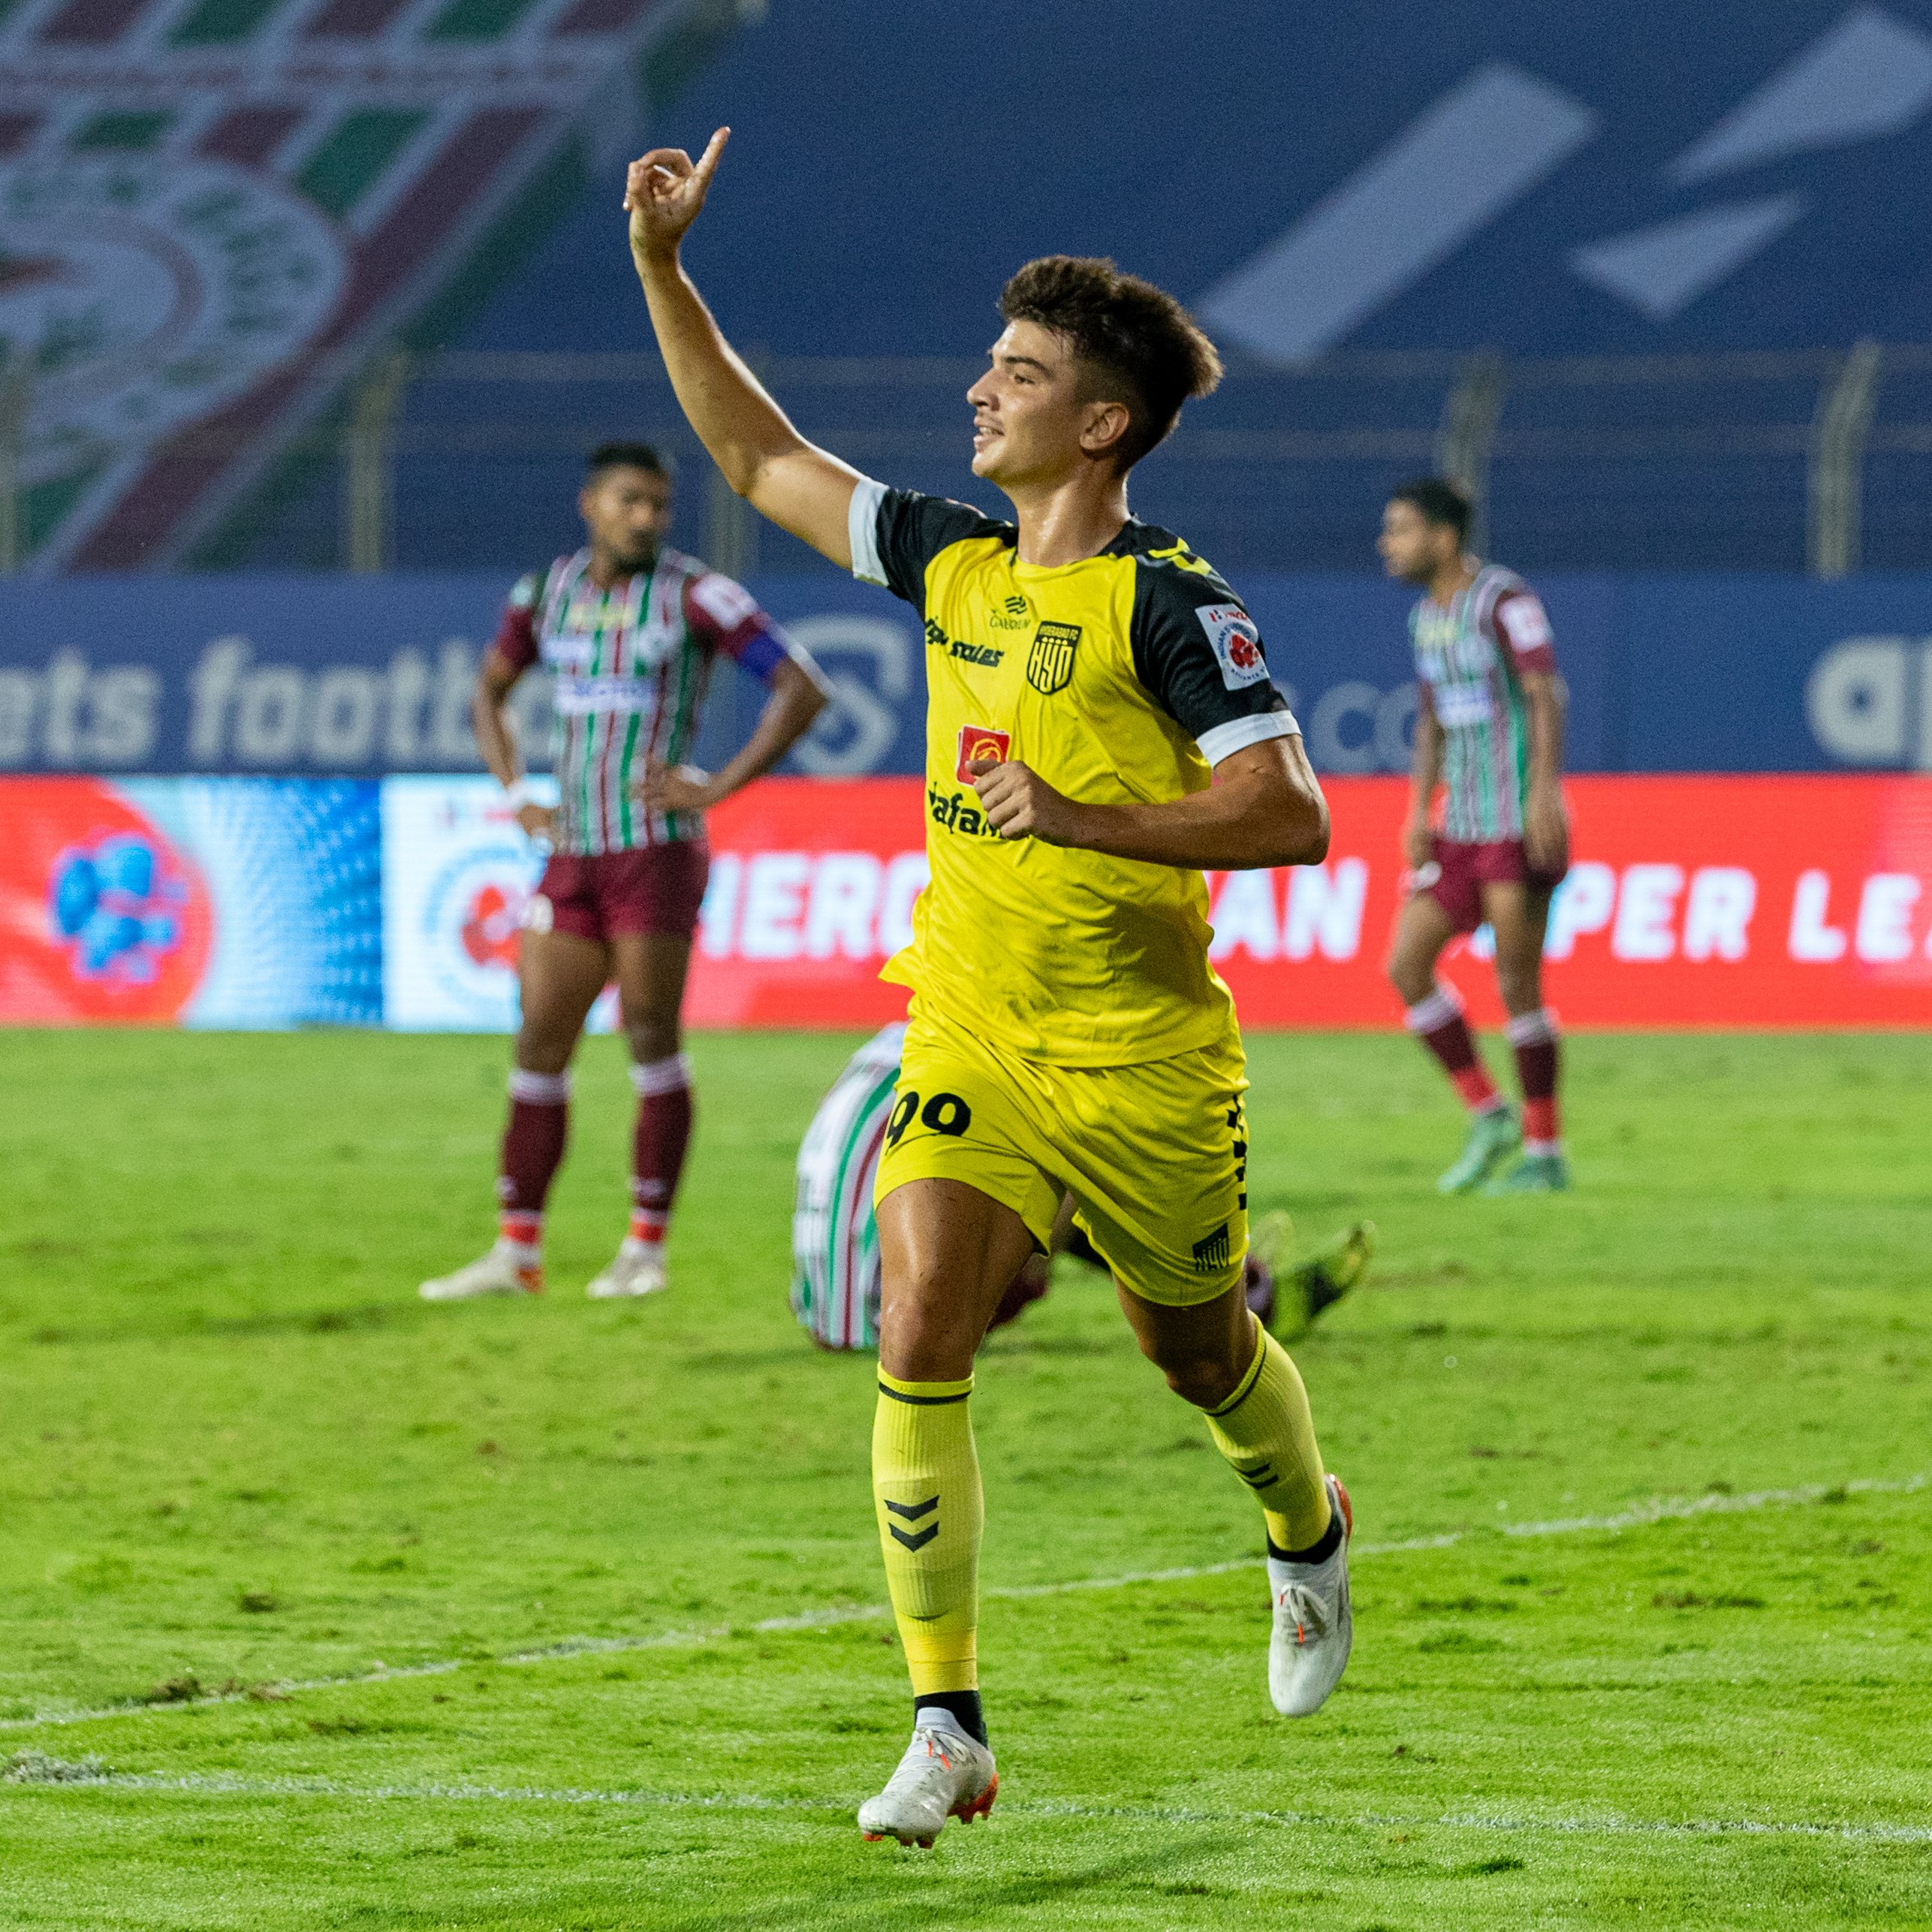 ISL 2021-22: Hyderabad FC head coach Manolo Marquez feels it was not a fair outcome after loss against Kerala Blasters